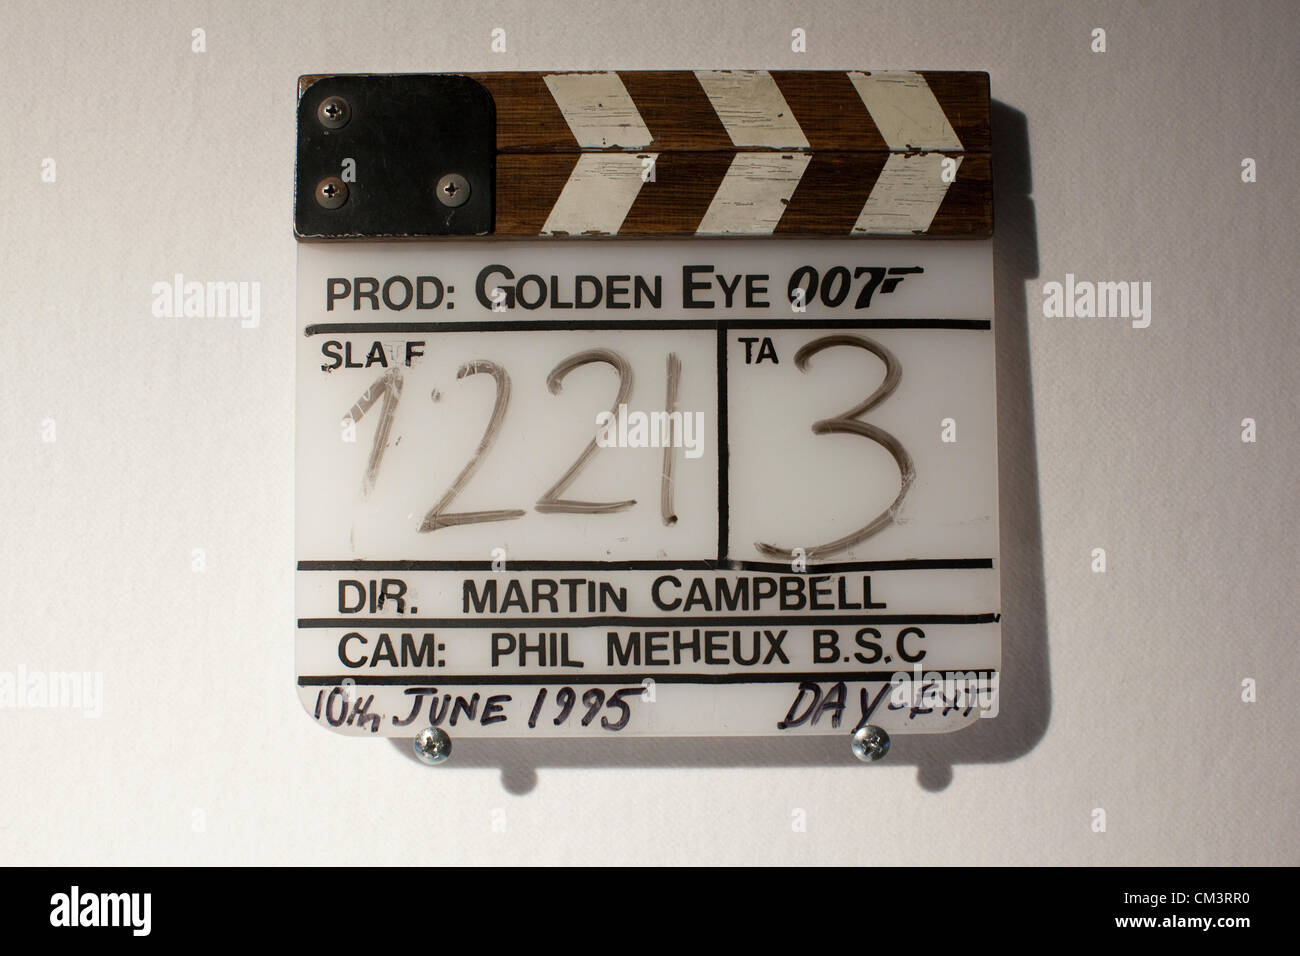 50 Years of James Bond The Auction at Christie's, London, UK 28.09.2012 To celebrate the 50th anniversary of James Bond on film, Christie's announces 50 Years of James Bond - The Auction, presenting the opportunity to acquire Bond memorabilia. Here  - A clapperboard used during the filing of 'GoldenEye' (1995) to be auctioned at Christie's online between 29th September until 5th October. Stock Photo